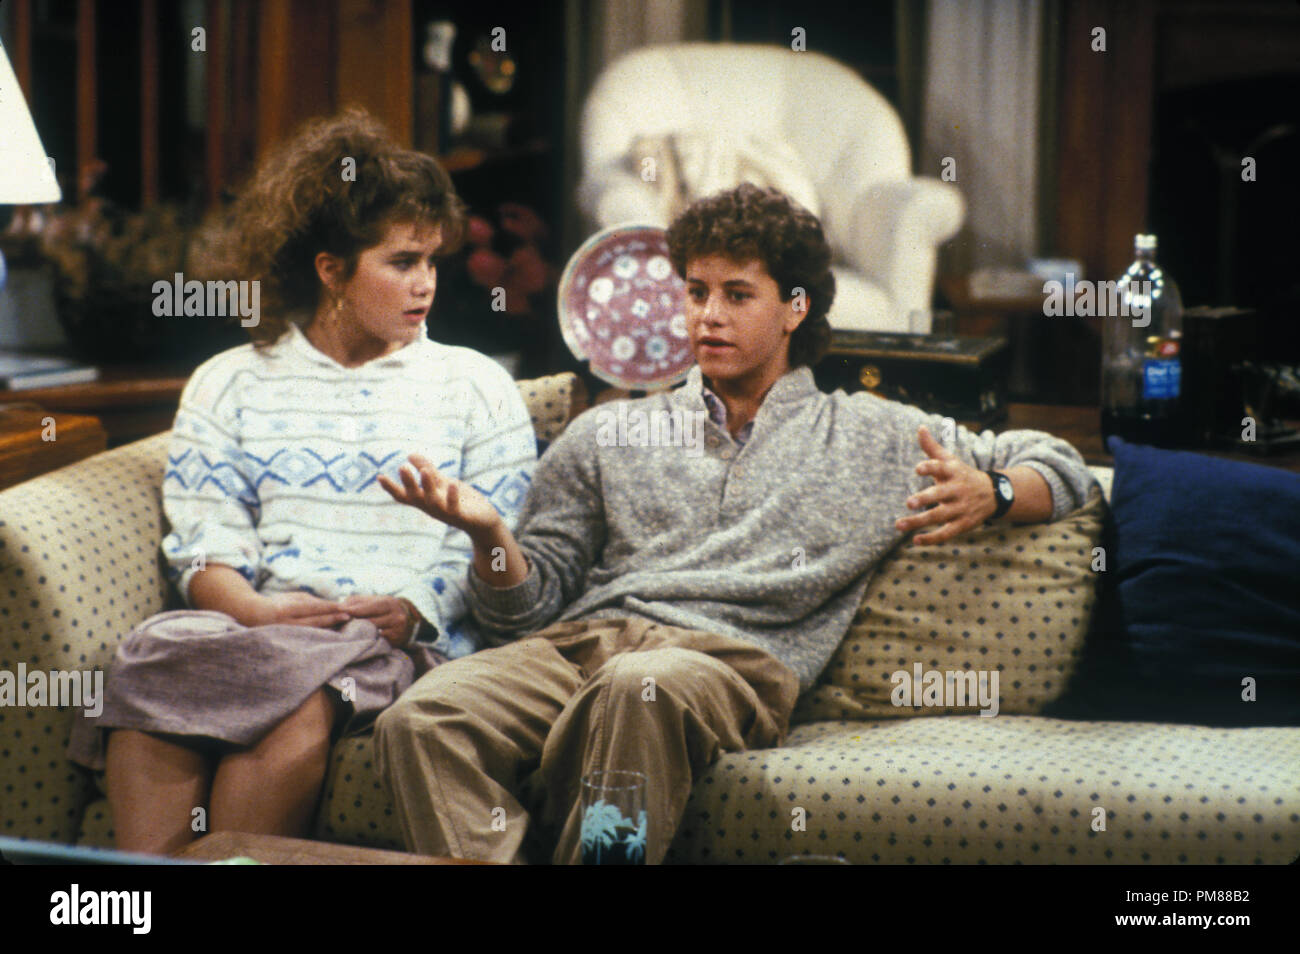 Studio Publicity Still from 'Growing Pains' Tracy Gold, Kirk Cameron circa 1984 Stock Photo